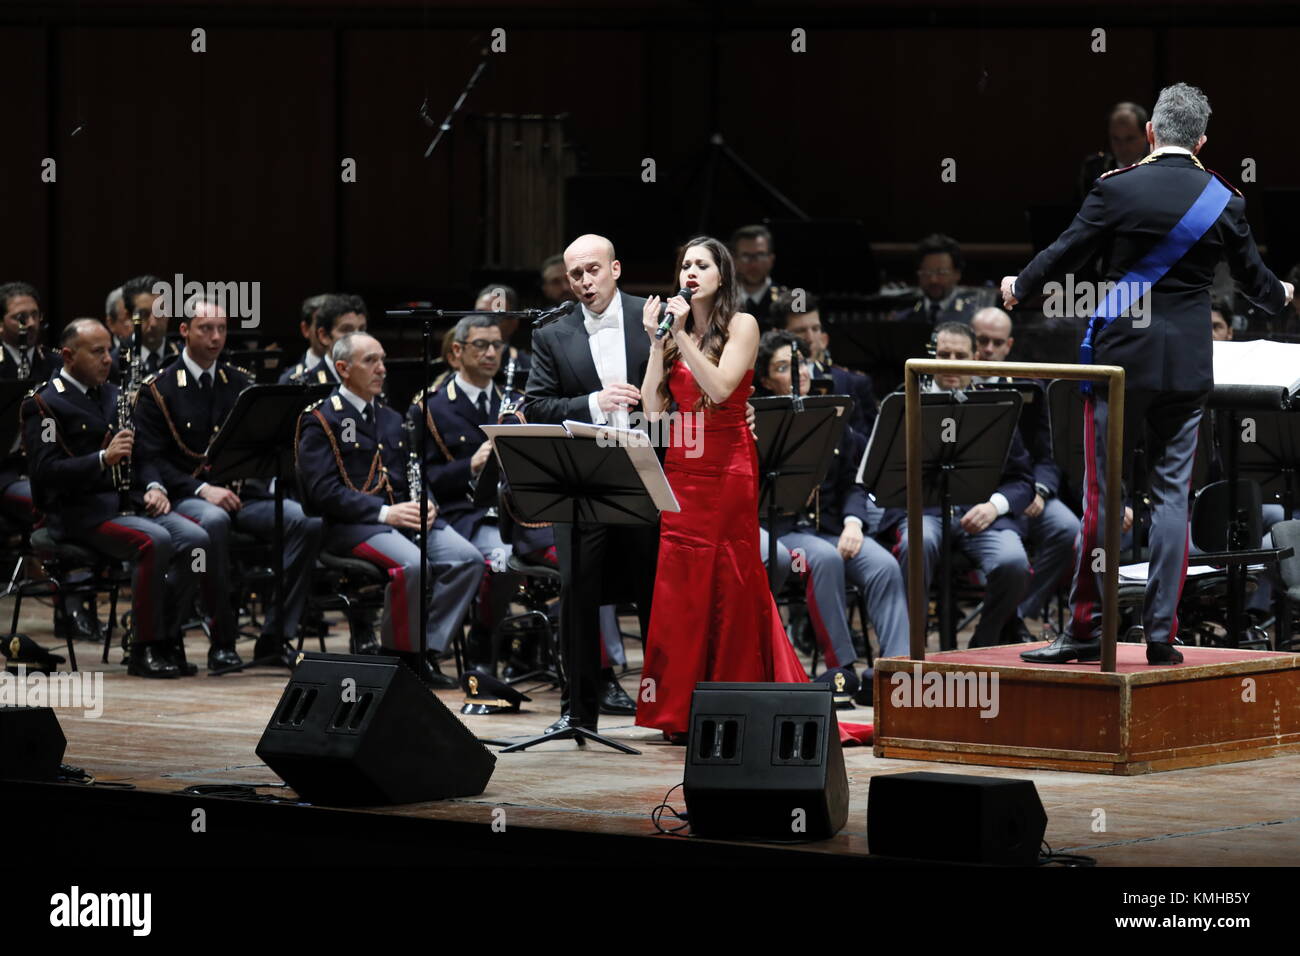 Rome, Italy - 11 December 2017: the tenor Aldo Caputo and the soprano Federica Balucani sing on the stage of the Auditorium Parco della Musica, on the occasion of the concert of the State Police Band, 'Being there always, with music and words'. Stock Photo